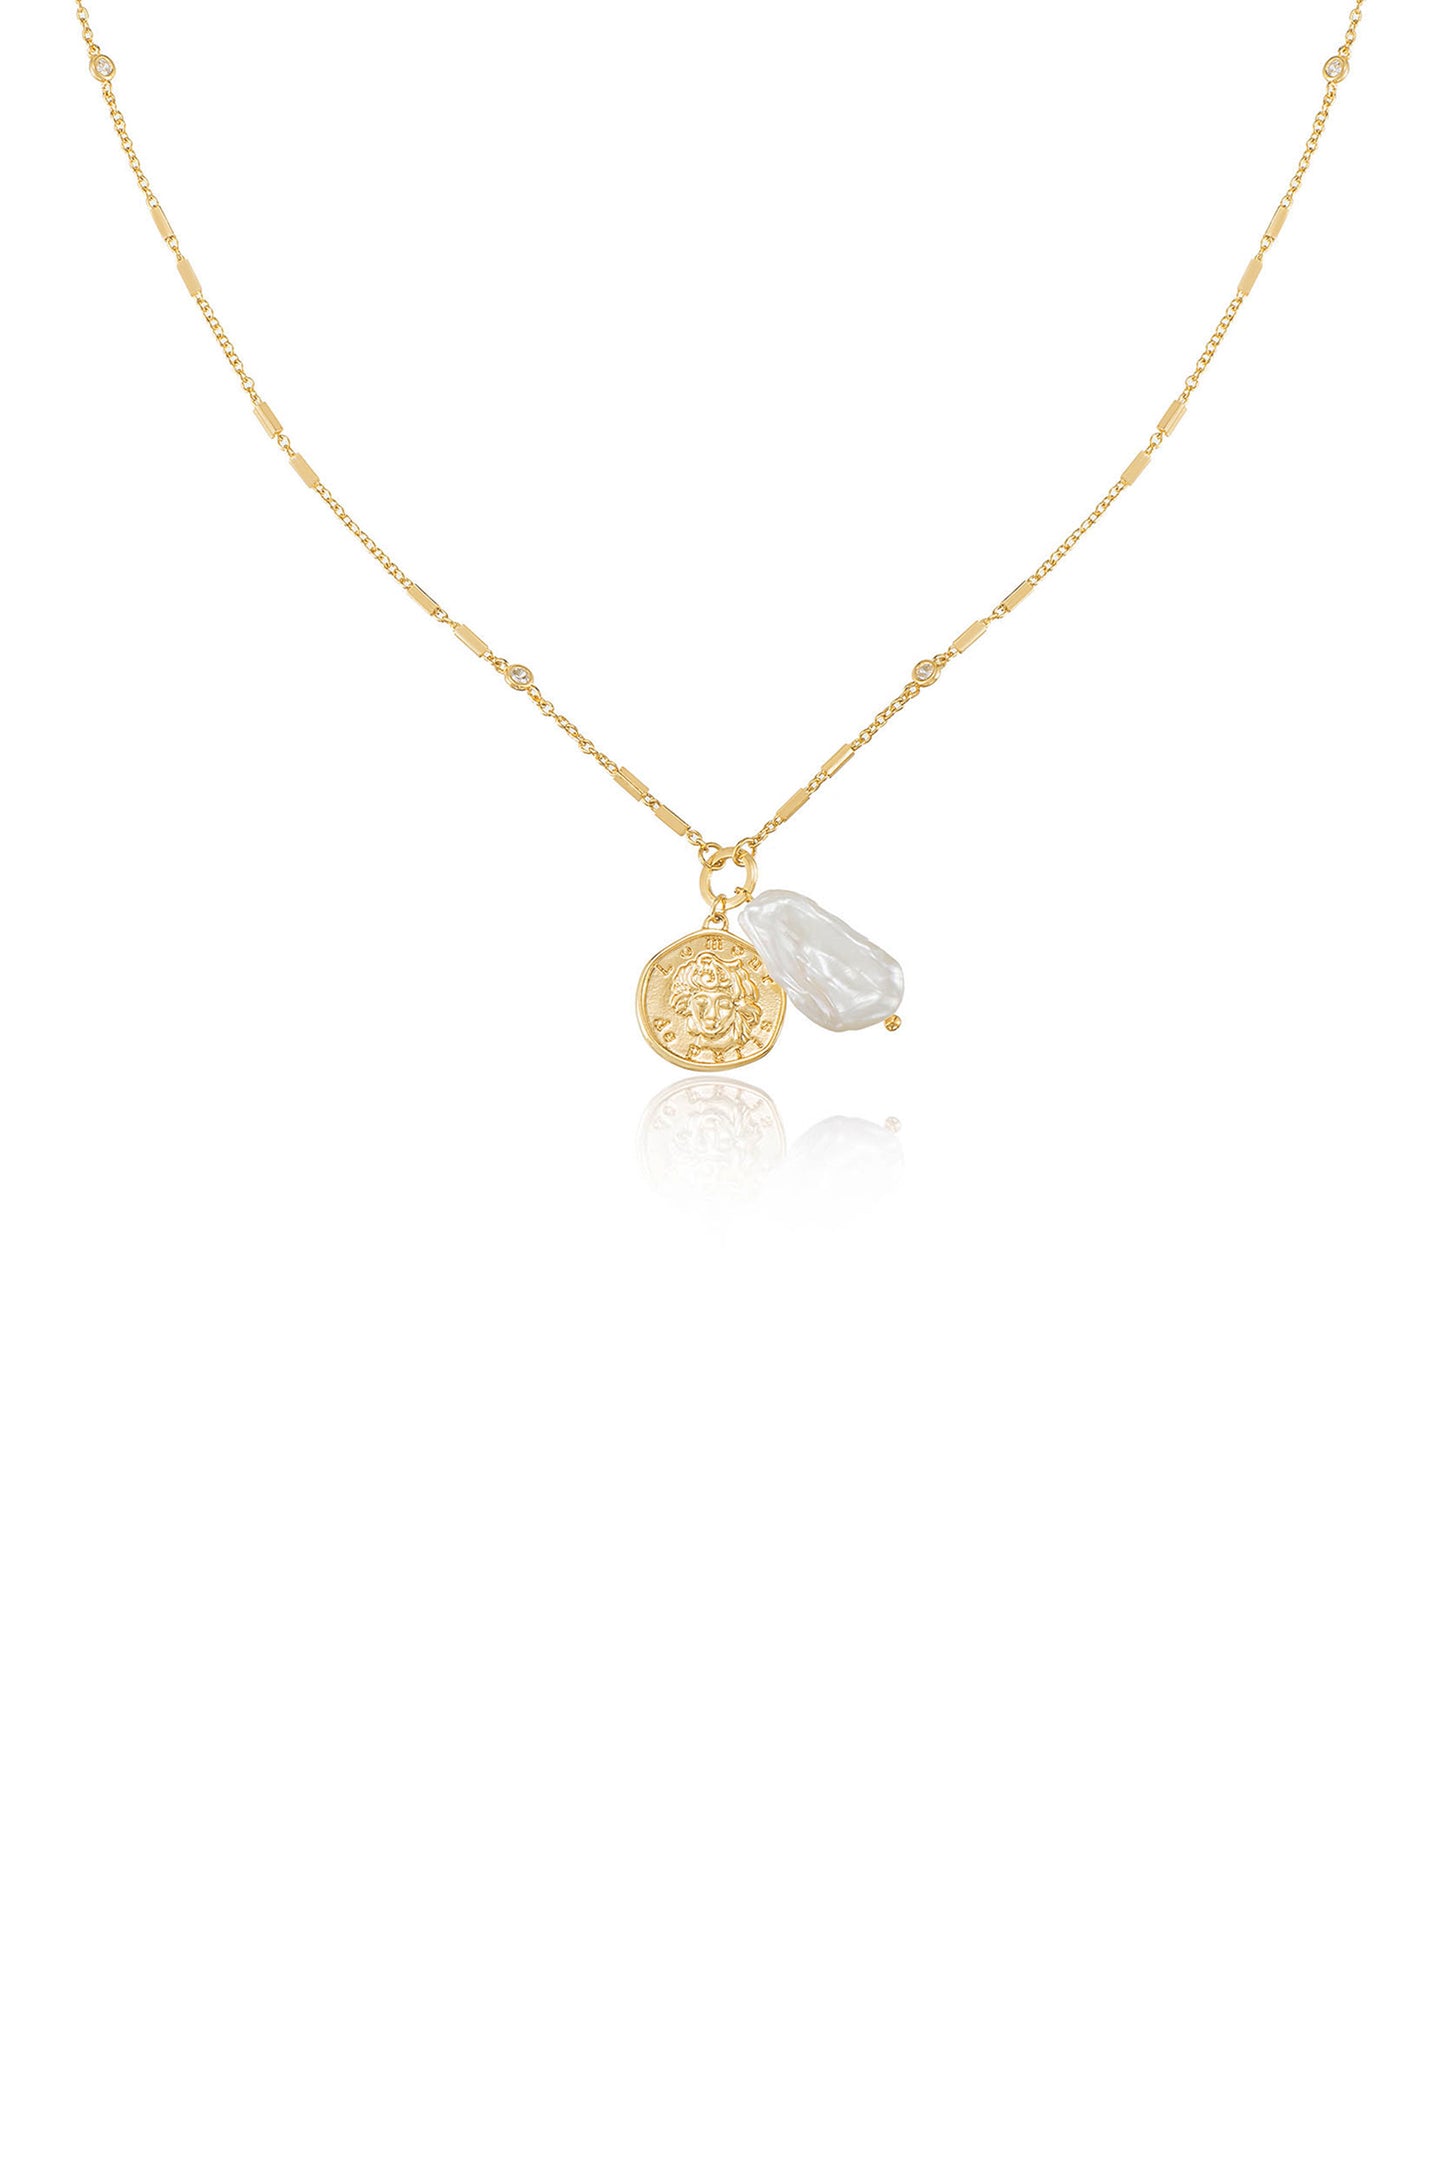 Trusty Trinkets Pearl and Coin 18k Gold Plated Necklace